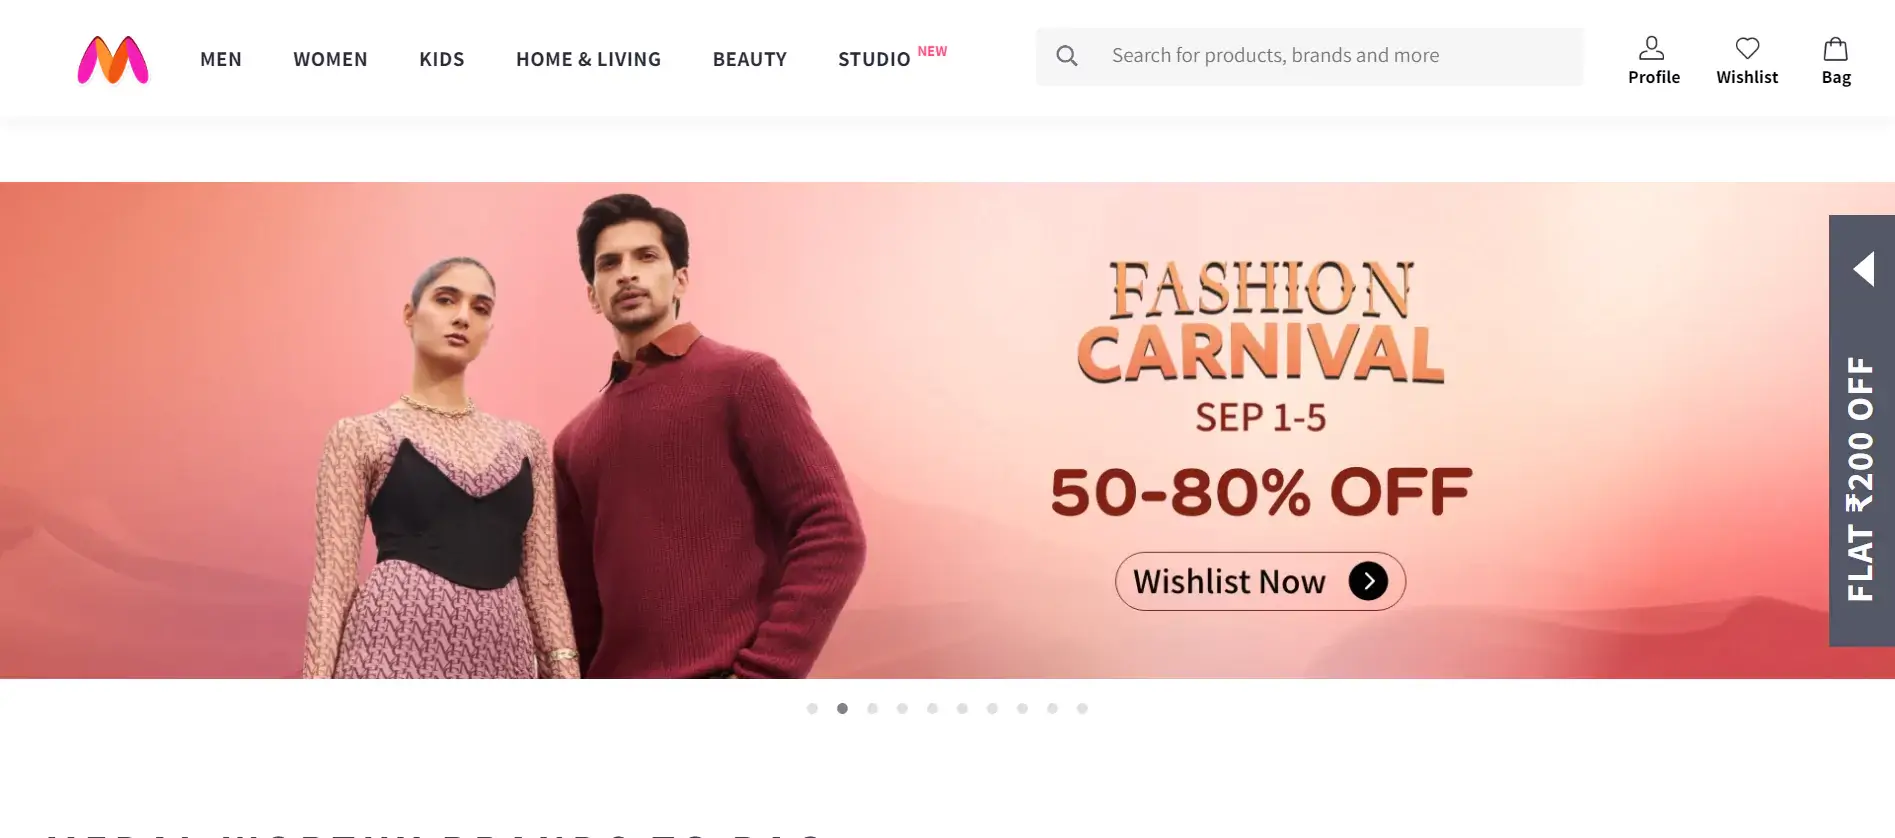 Myntra is a well-known name in the list of top eCommerce sites in India